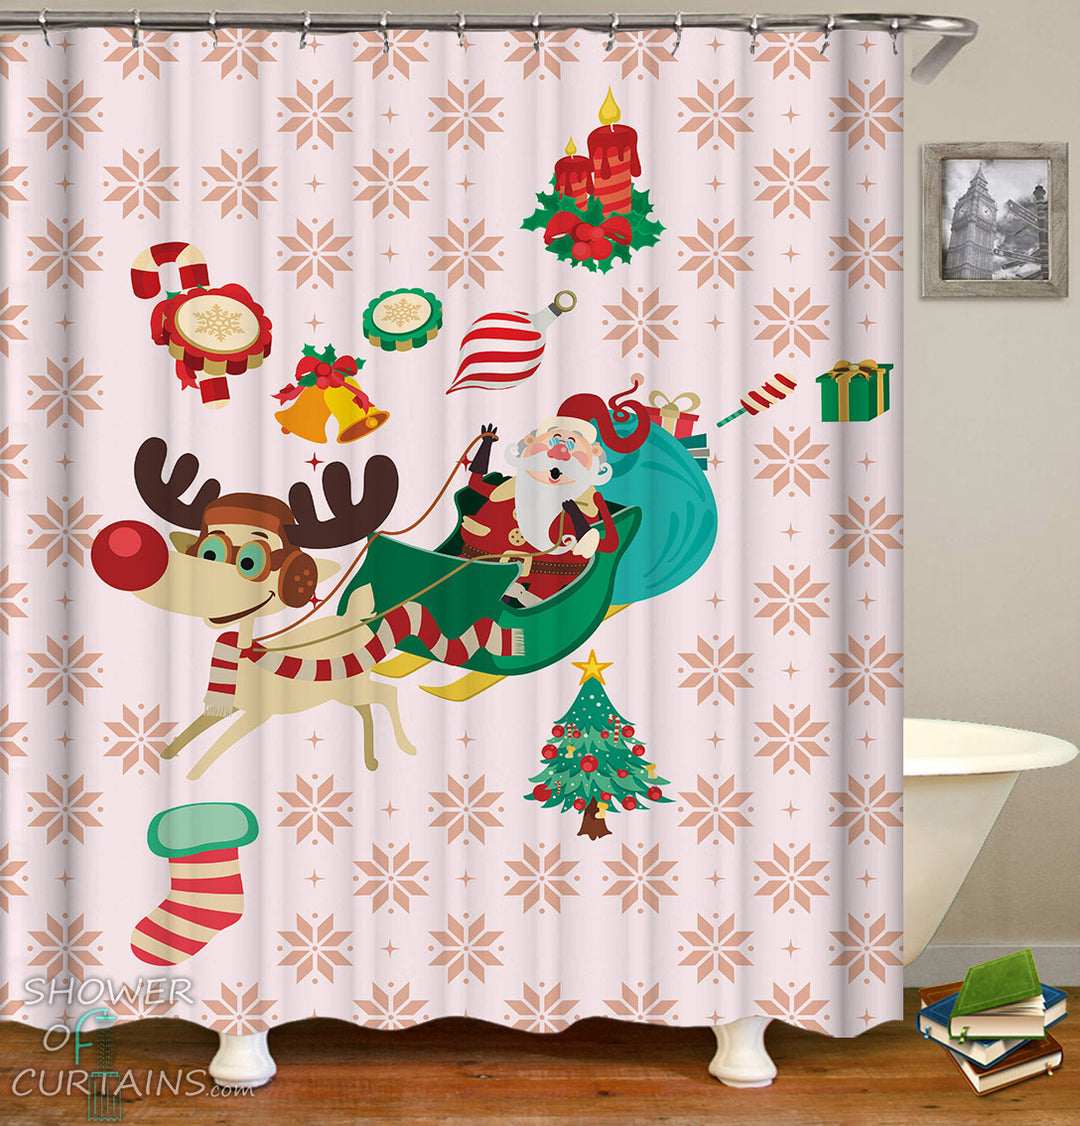 Christmas Shower Curtain of Christmas Icons